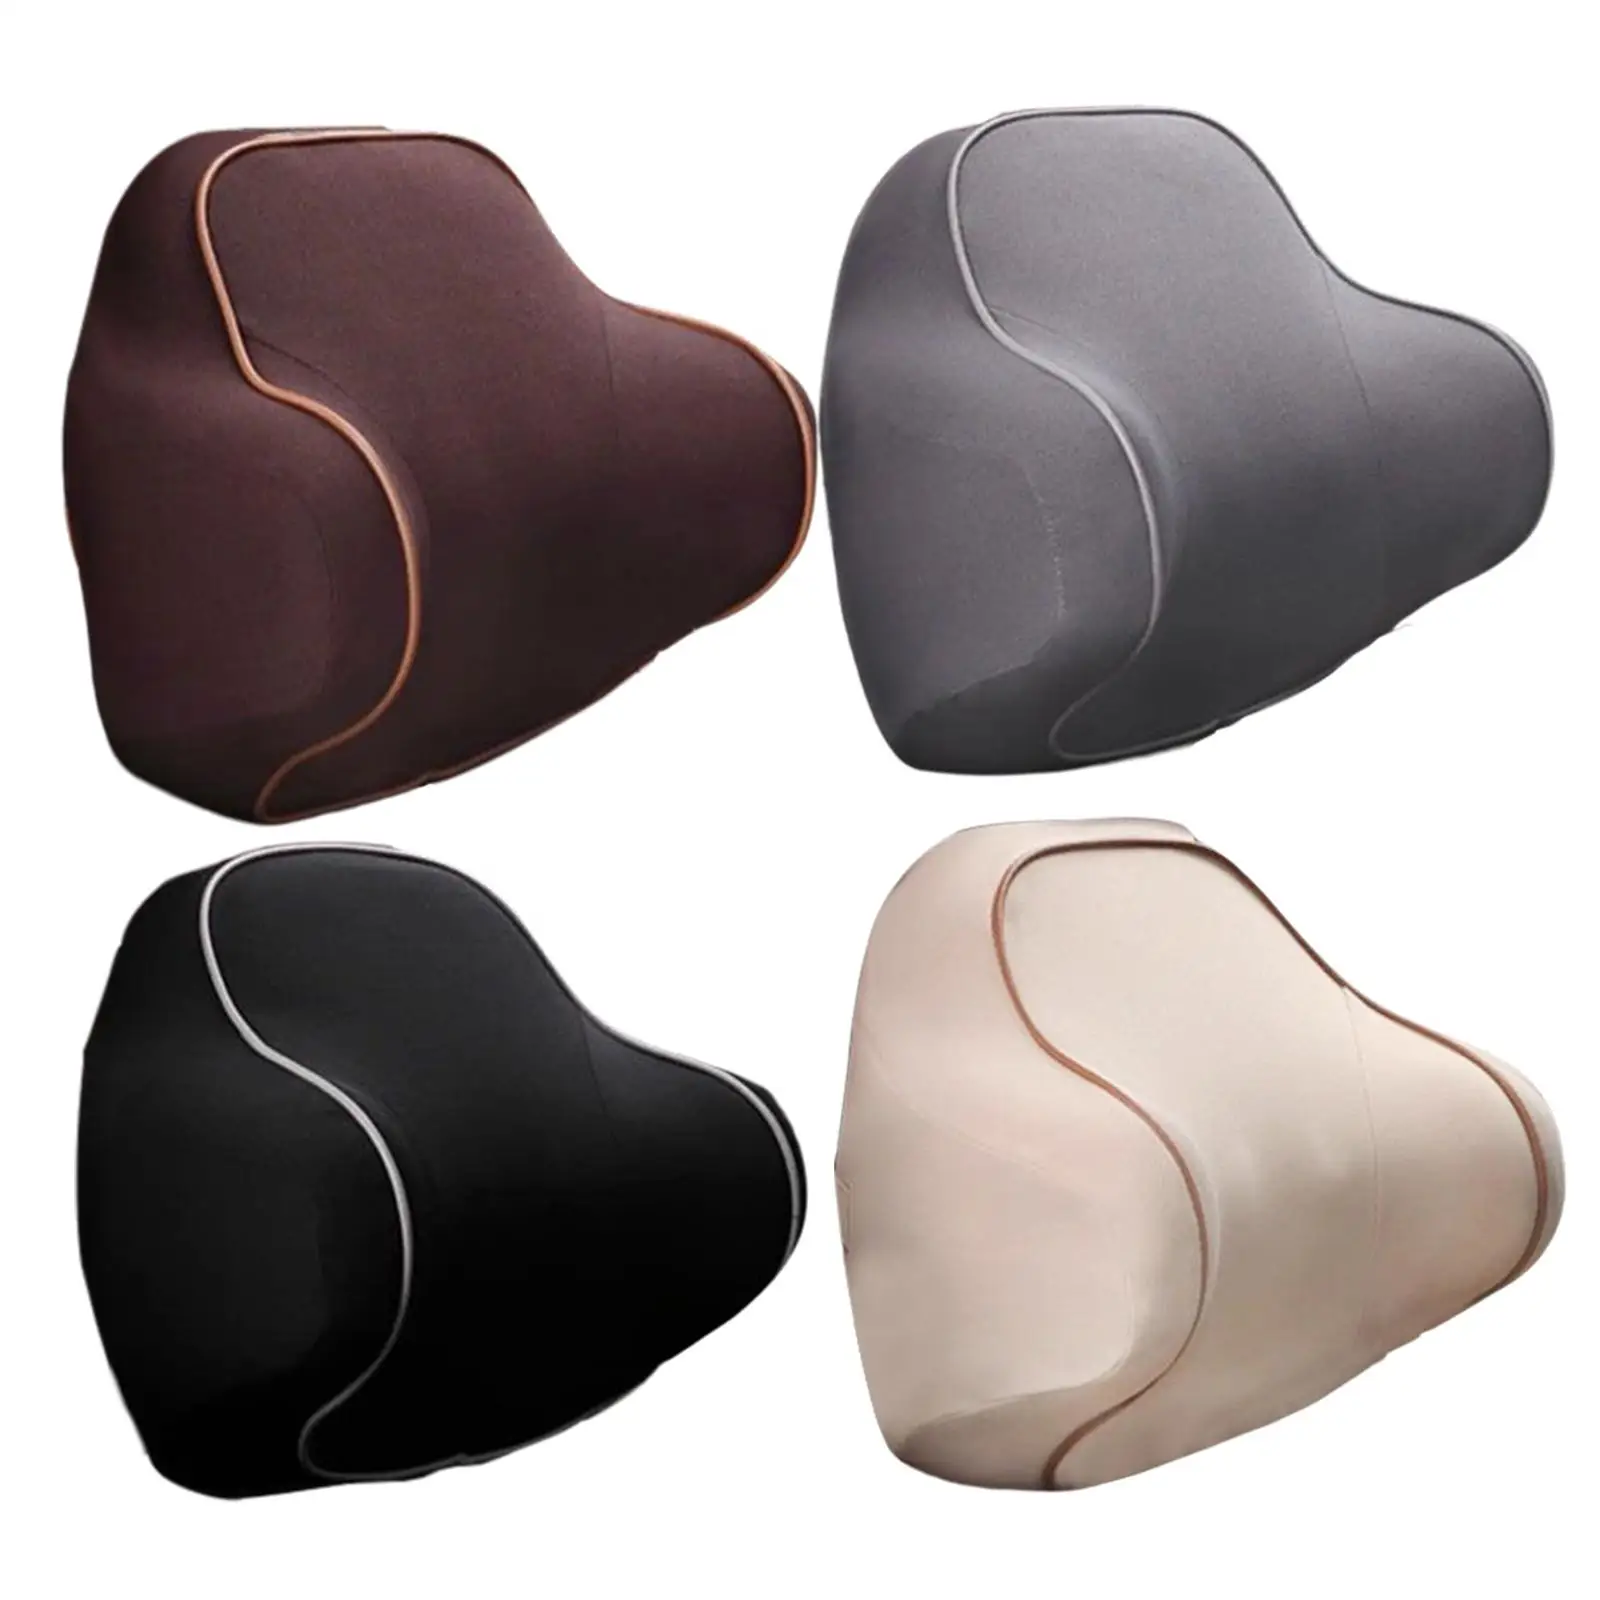 Auto Car Seat Pillow Head Support Neck Rest Memory Foam Relieve Muscle Tension High Density Space Adjustable Elastic Band